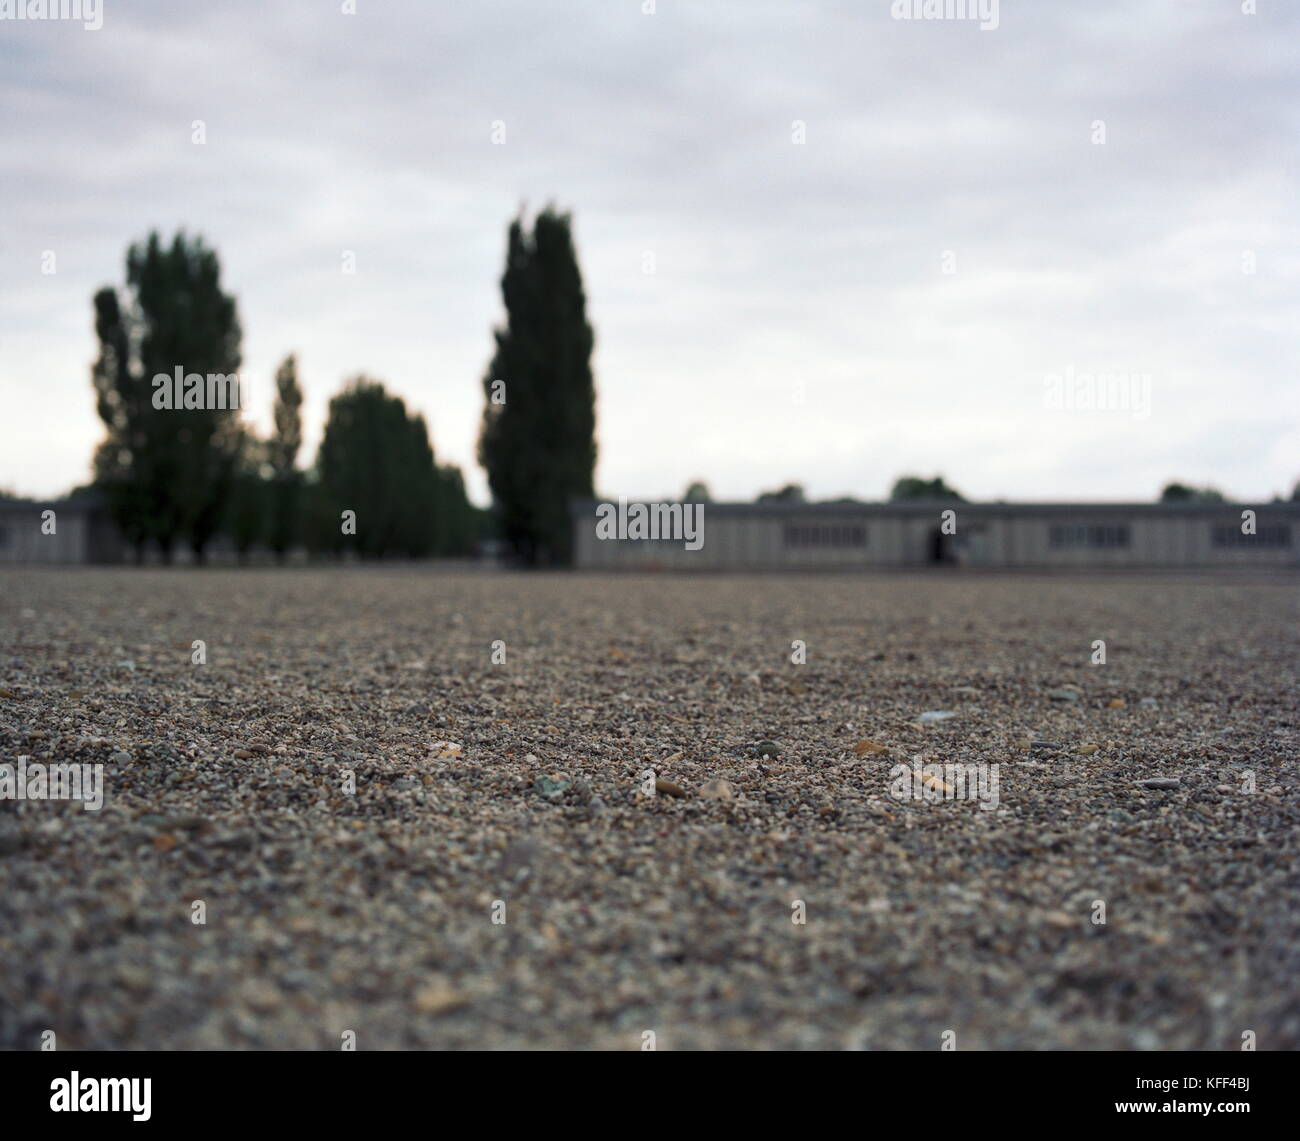 Concentration camp, Dachau, Germany, Stock Photo